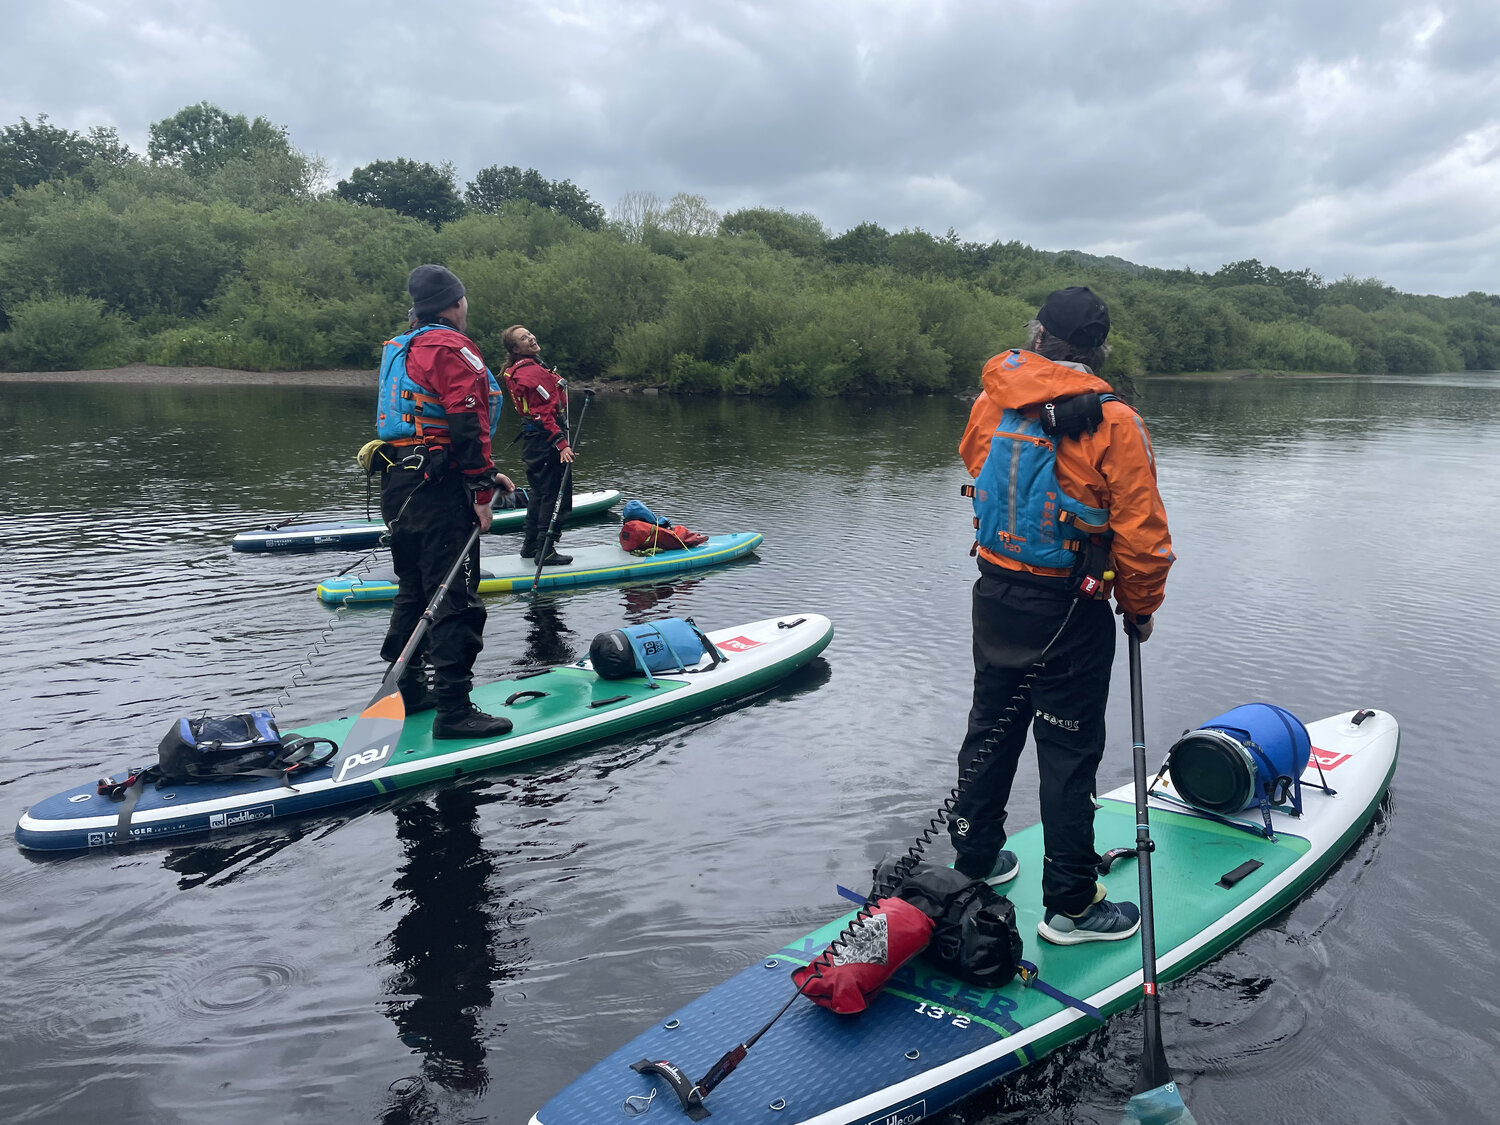 water activities in Northumberland - CBK SUP cook out